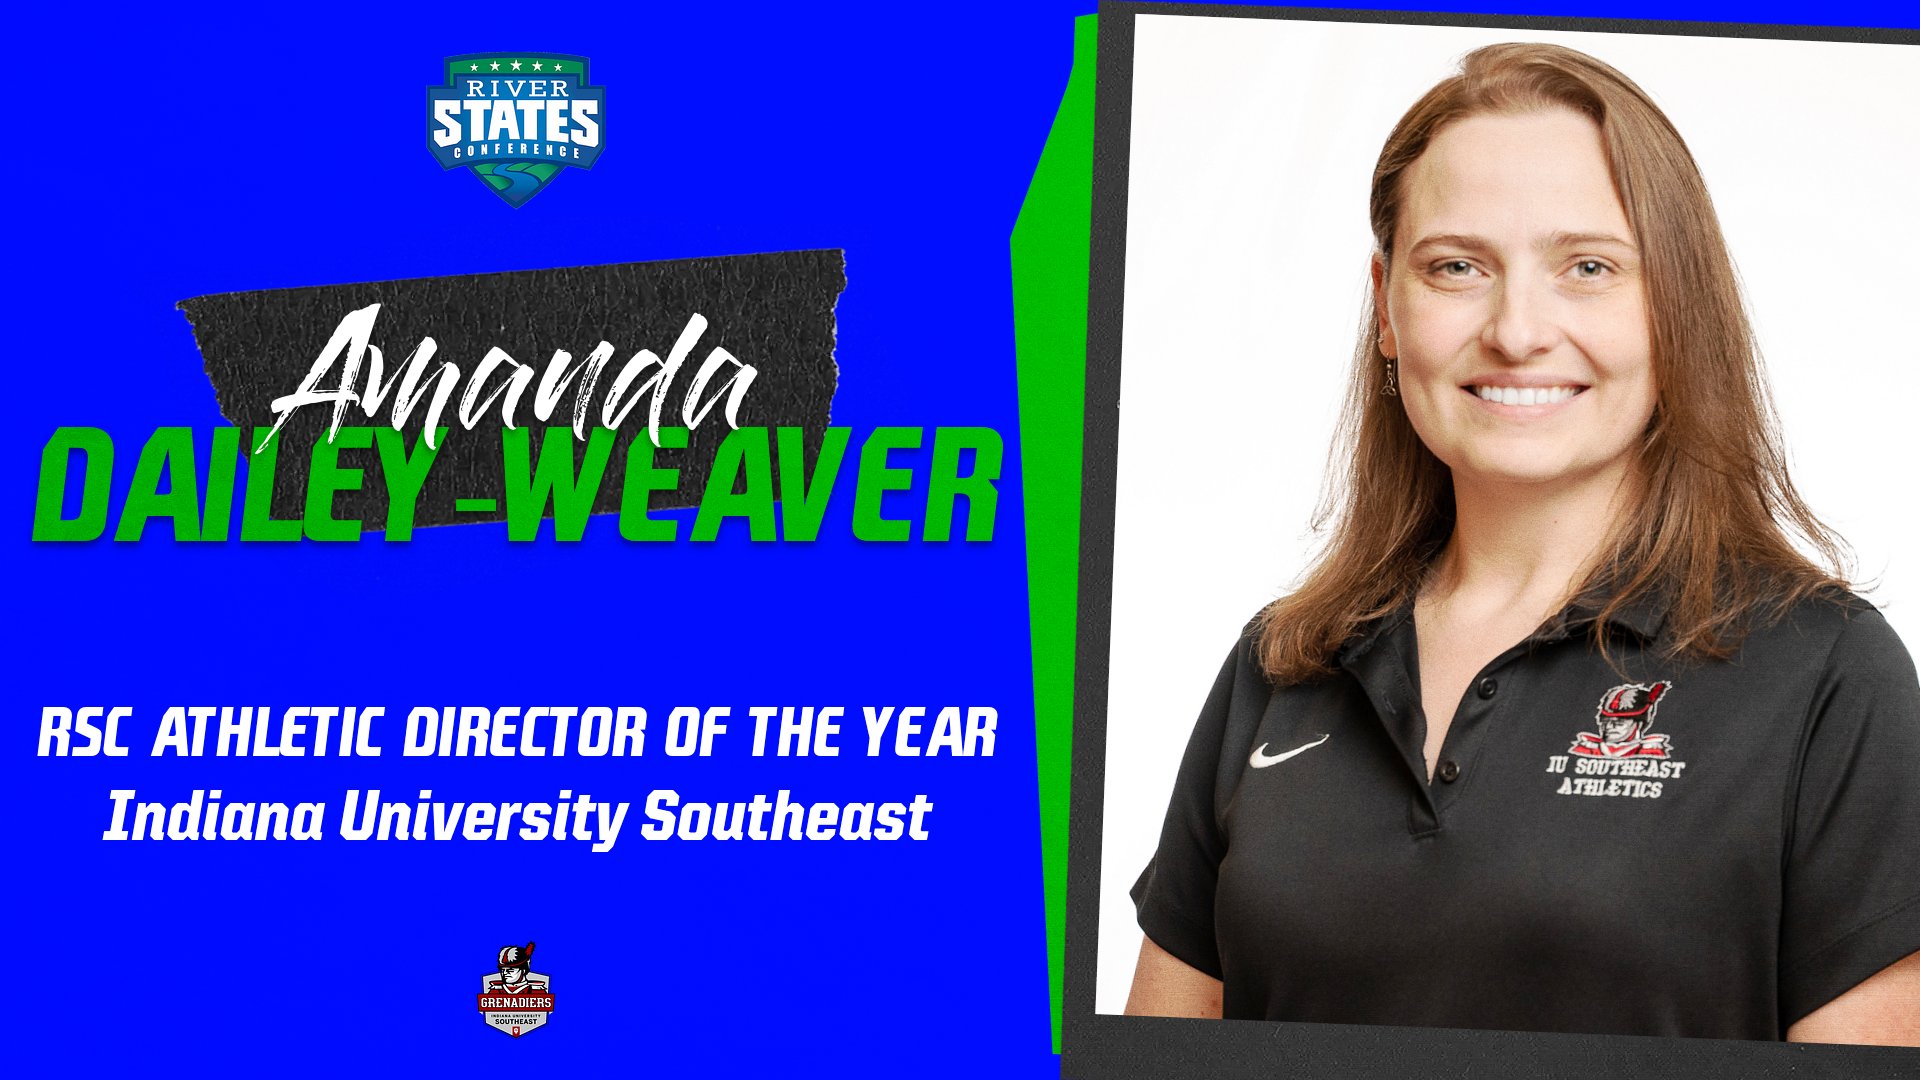 Amanda Dailey-Weaver Named RSC Athletic Director of the Year